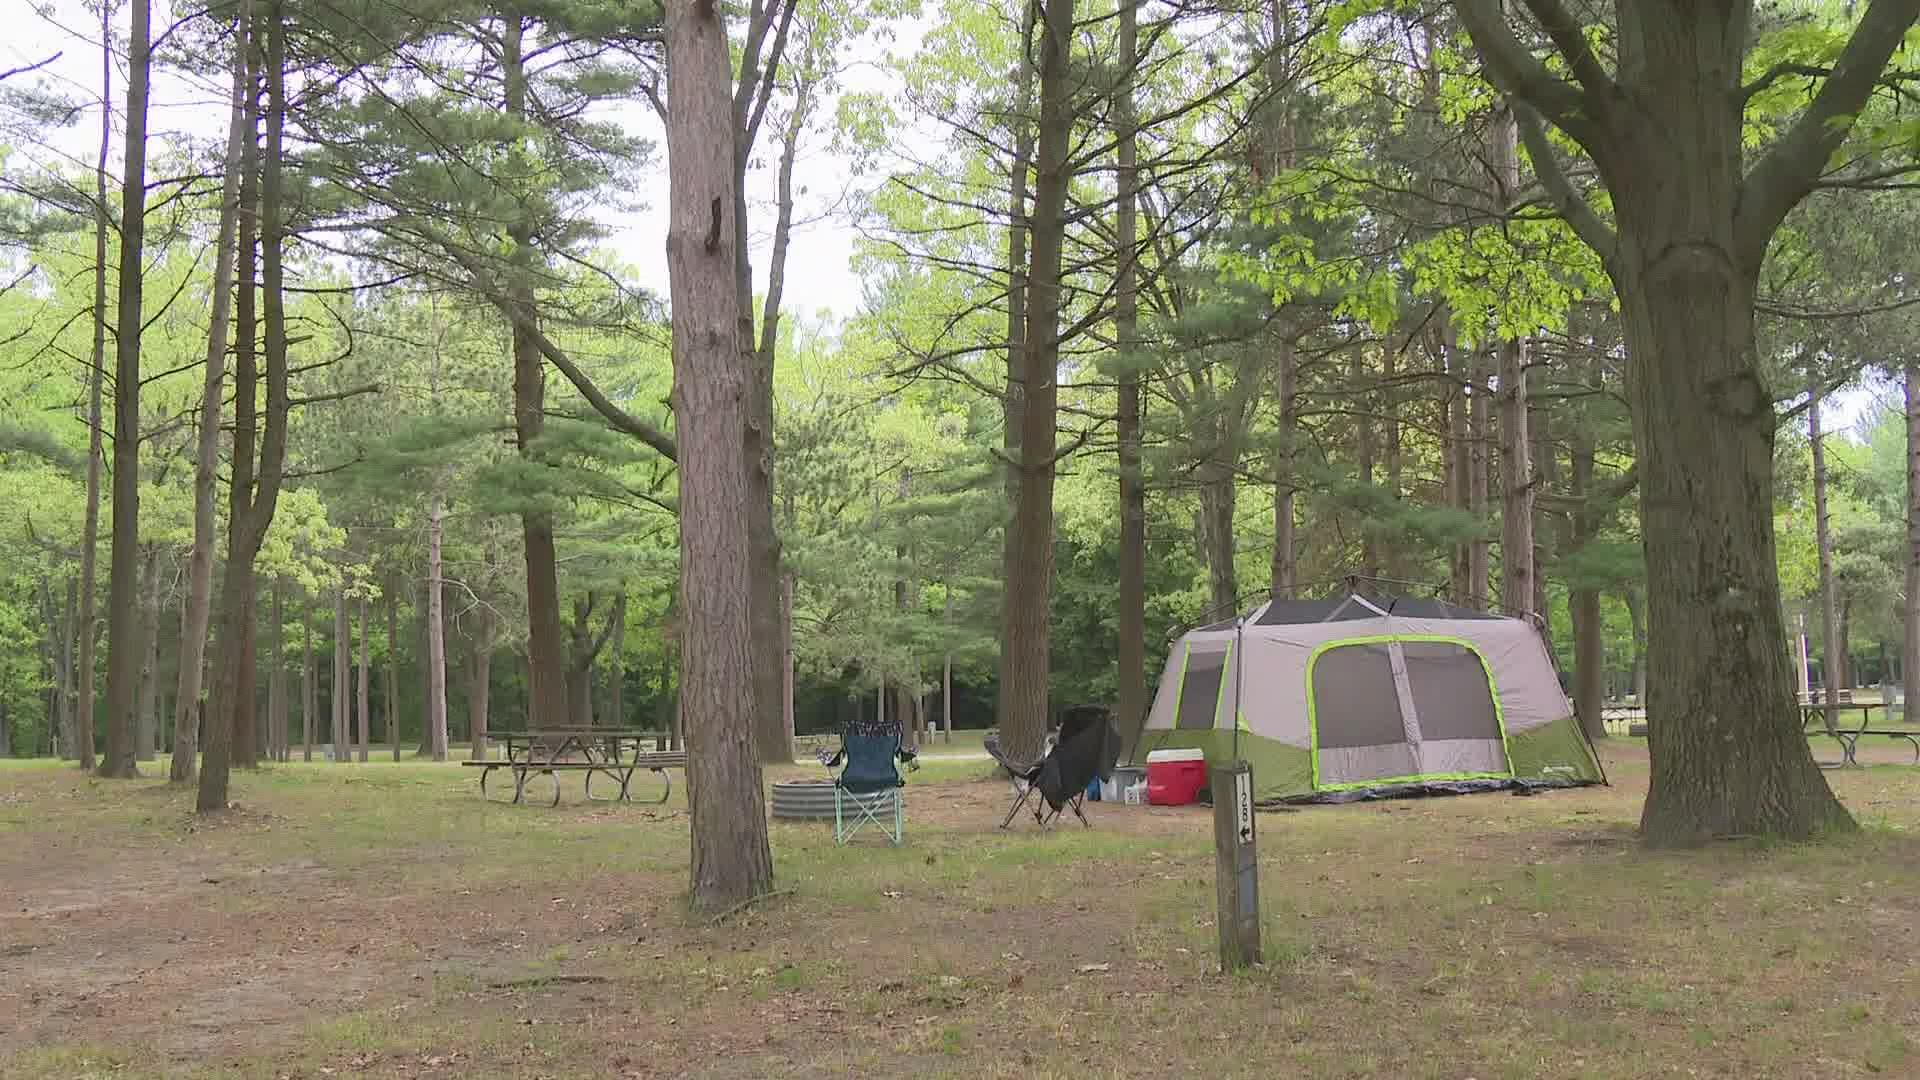 As COVID 19 Cases decline, more and more campgrounds around West Michigan are opening.